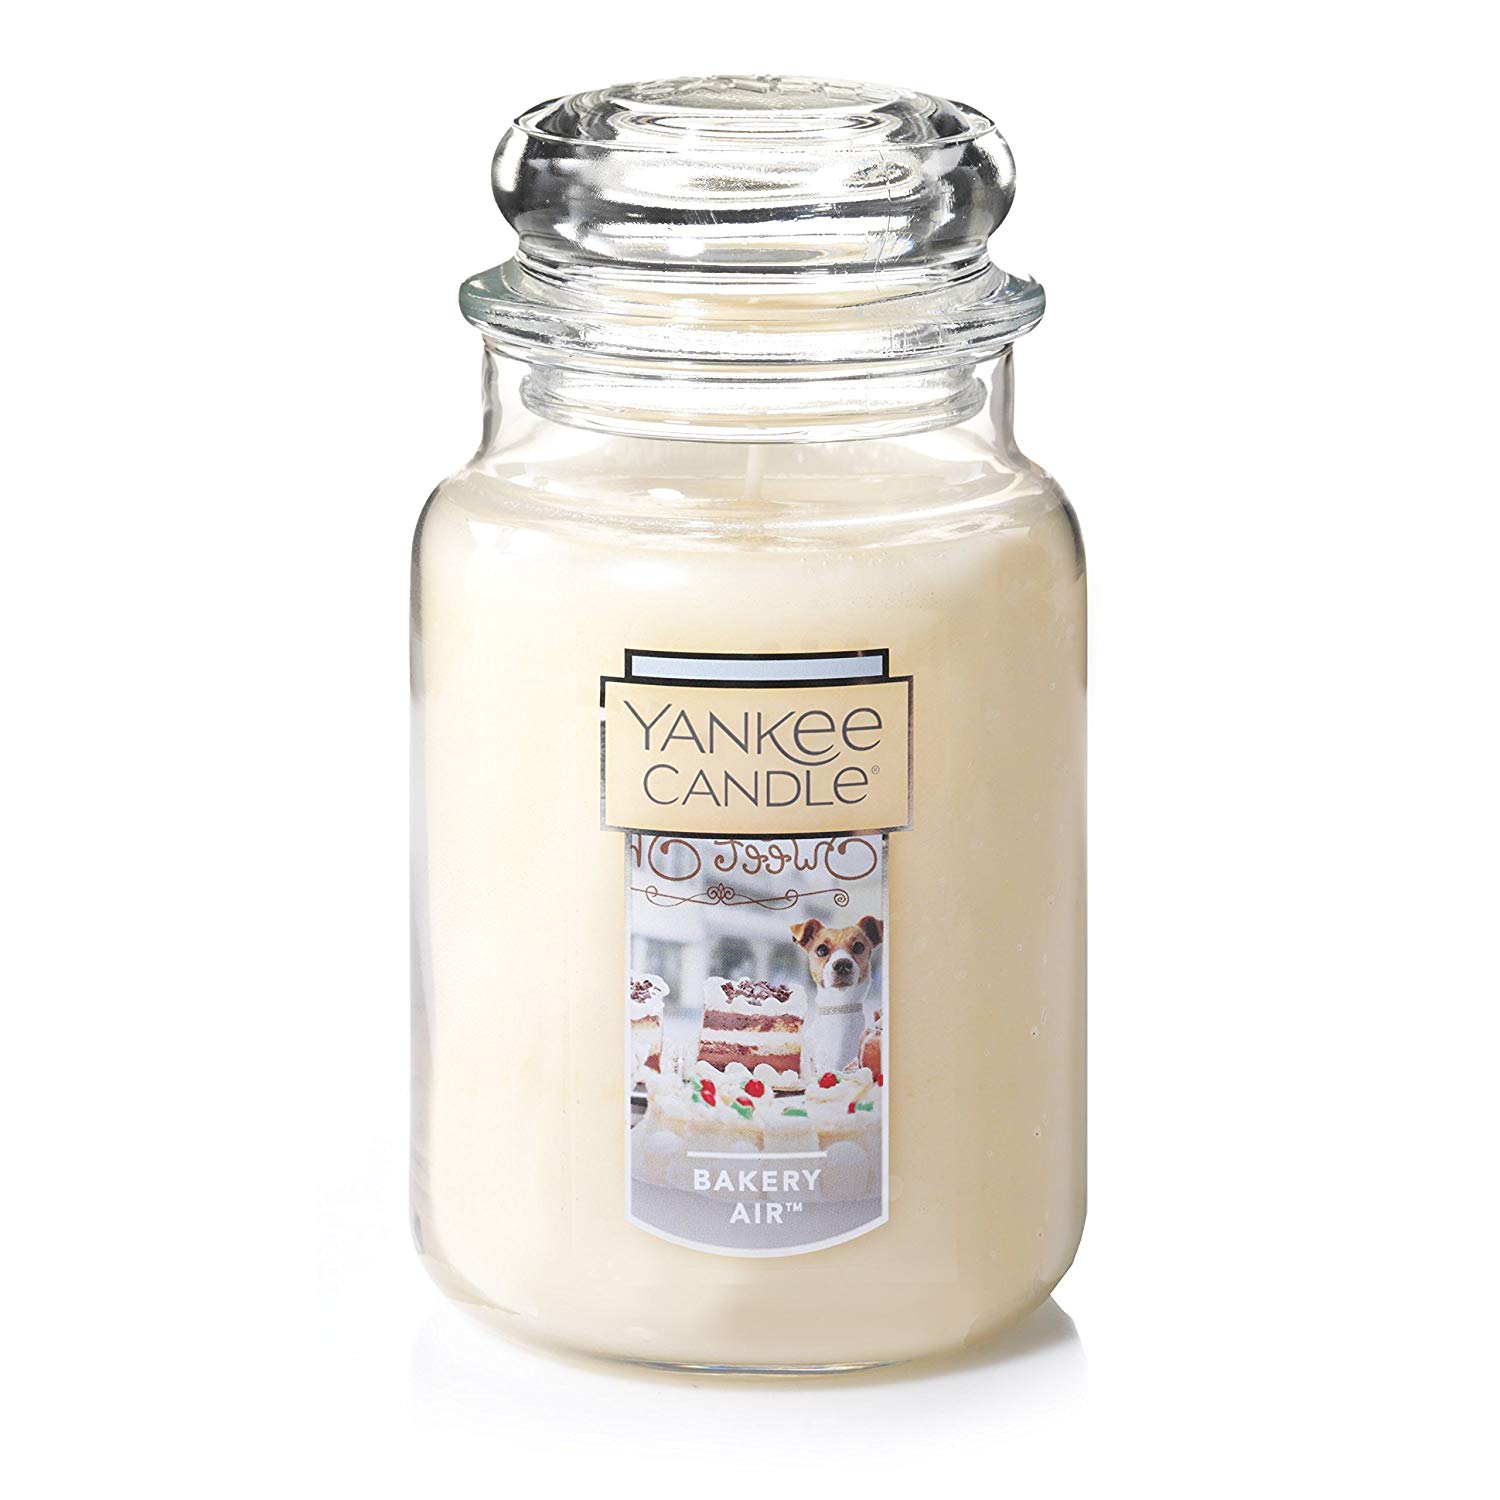 Yankee Candle Is Having a Massive Clearance Sale on Candles